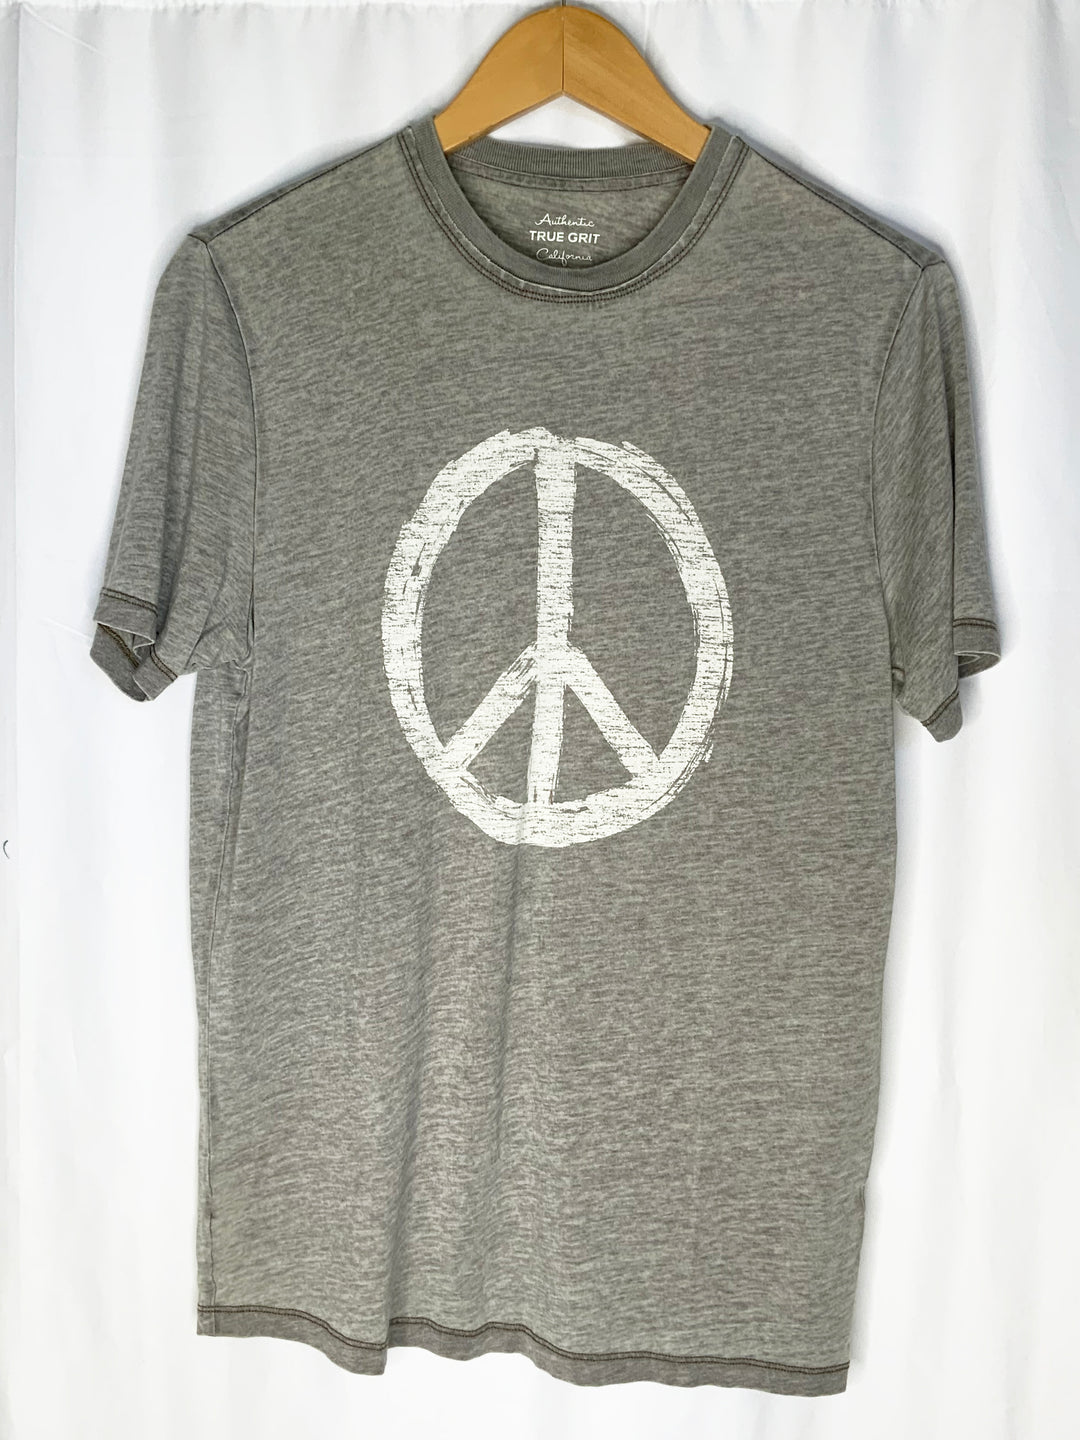 BOWERY BURNOUT PEACE CREW - DARK MOSS - Kingfisher Road - Online Boutique